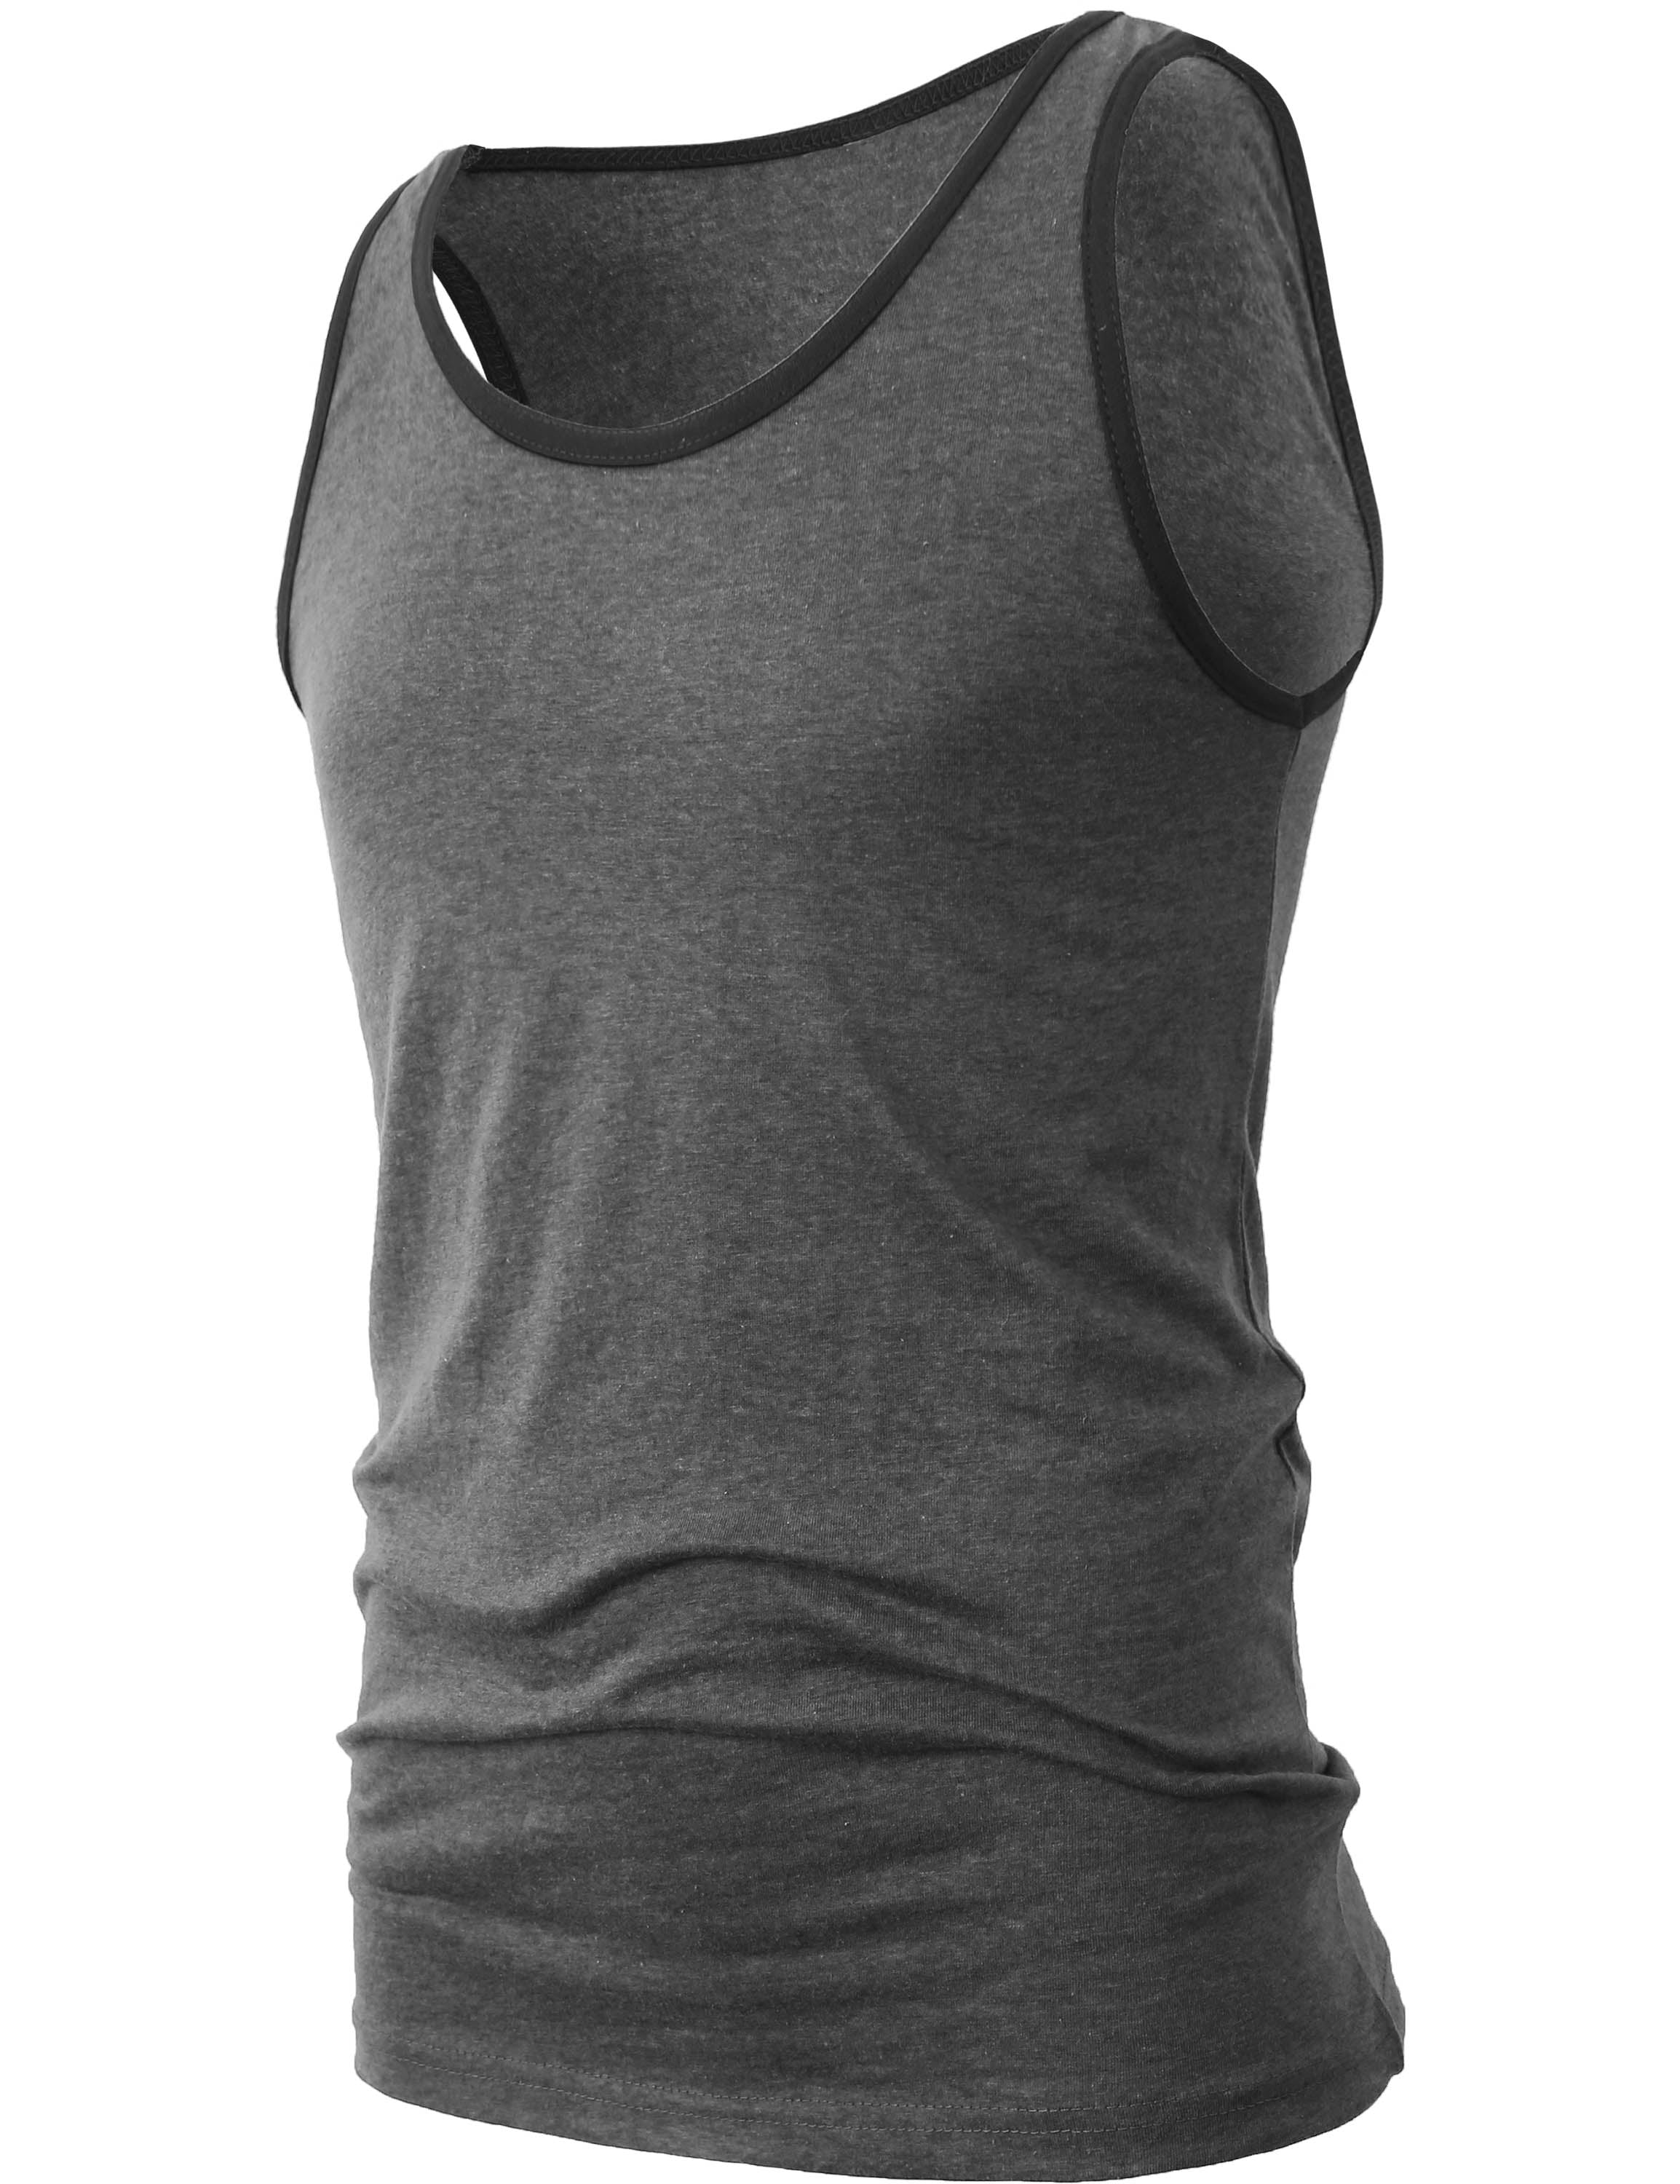 Hat and Beyond Mens Active Muscle Tank Top Athletic Boxing Gym Workout Shirts